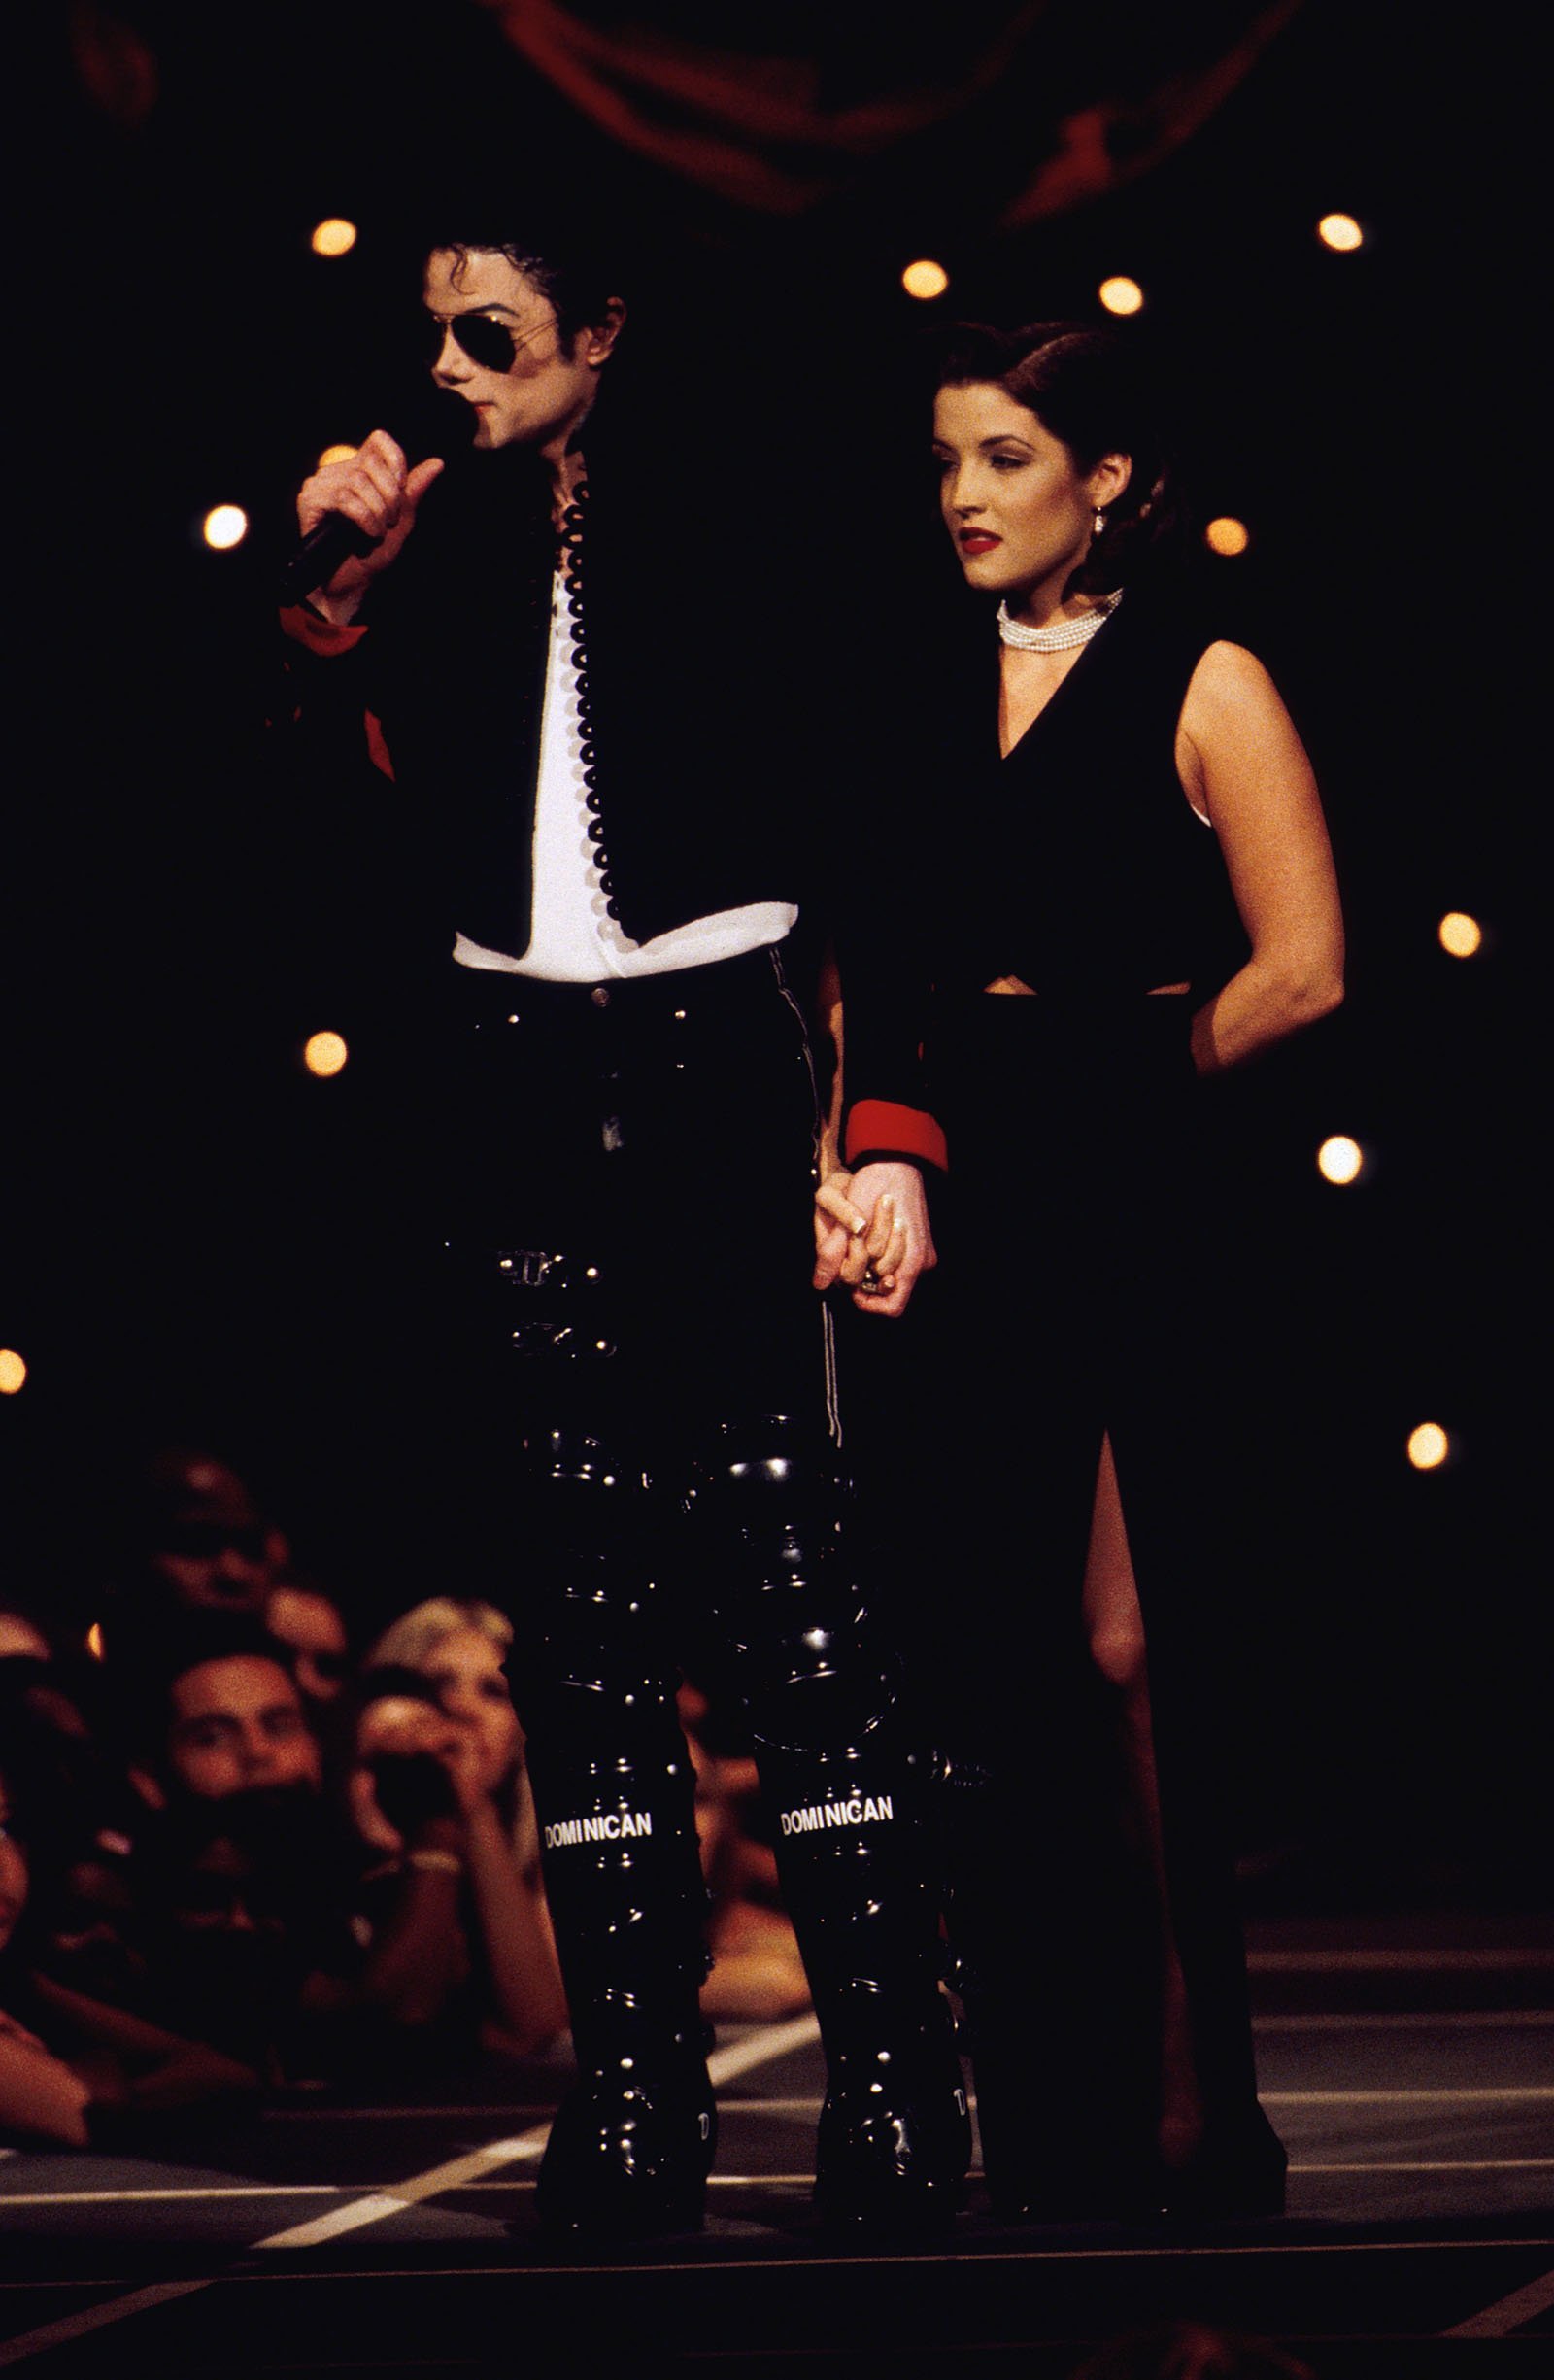 Michael Jackson and Lisa Marie Presley at the 1994 MTV Video Music Awards in Los Angeles, CA on September 8, 1994. | Source: Getty Images.